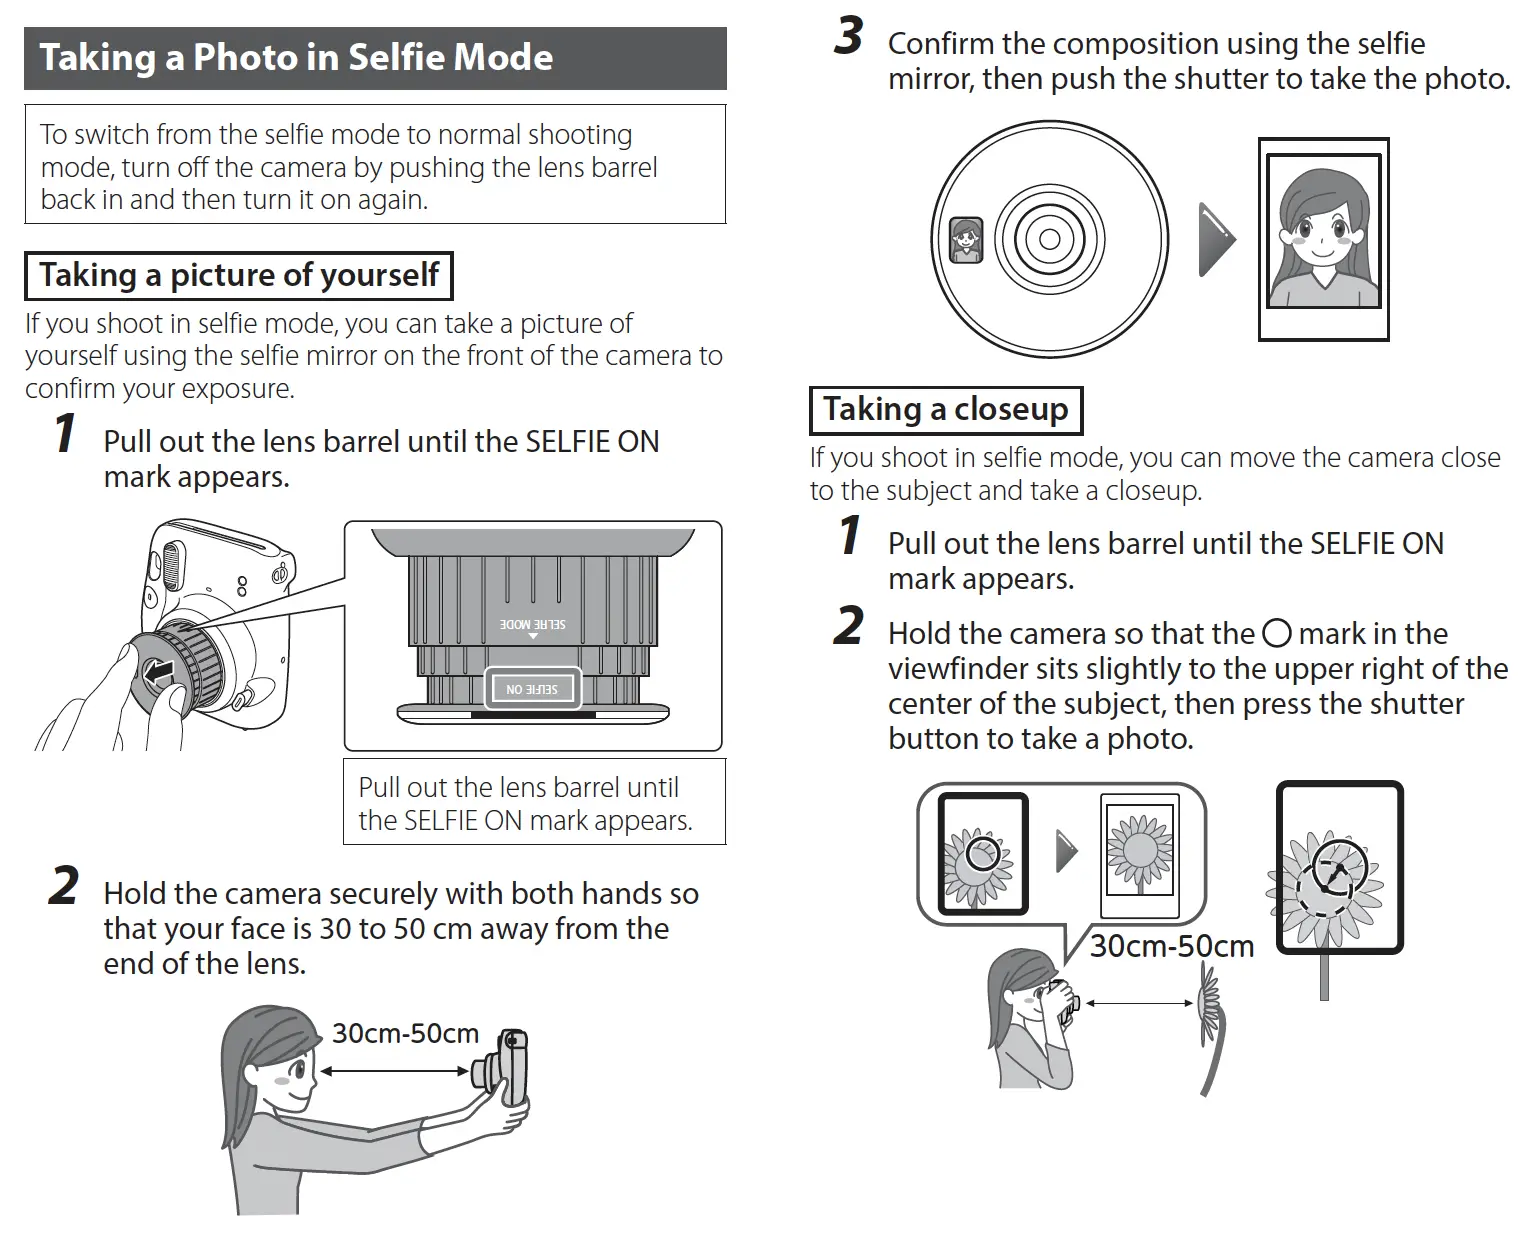 Steps for Using the Selfie Mode on Instax Mini 11